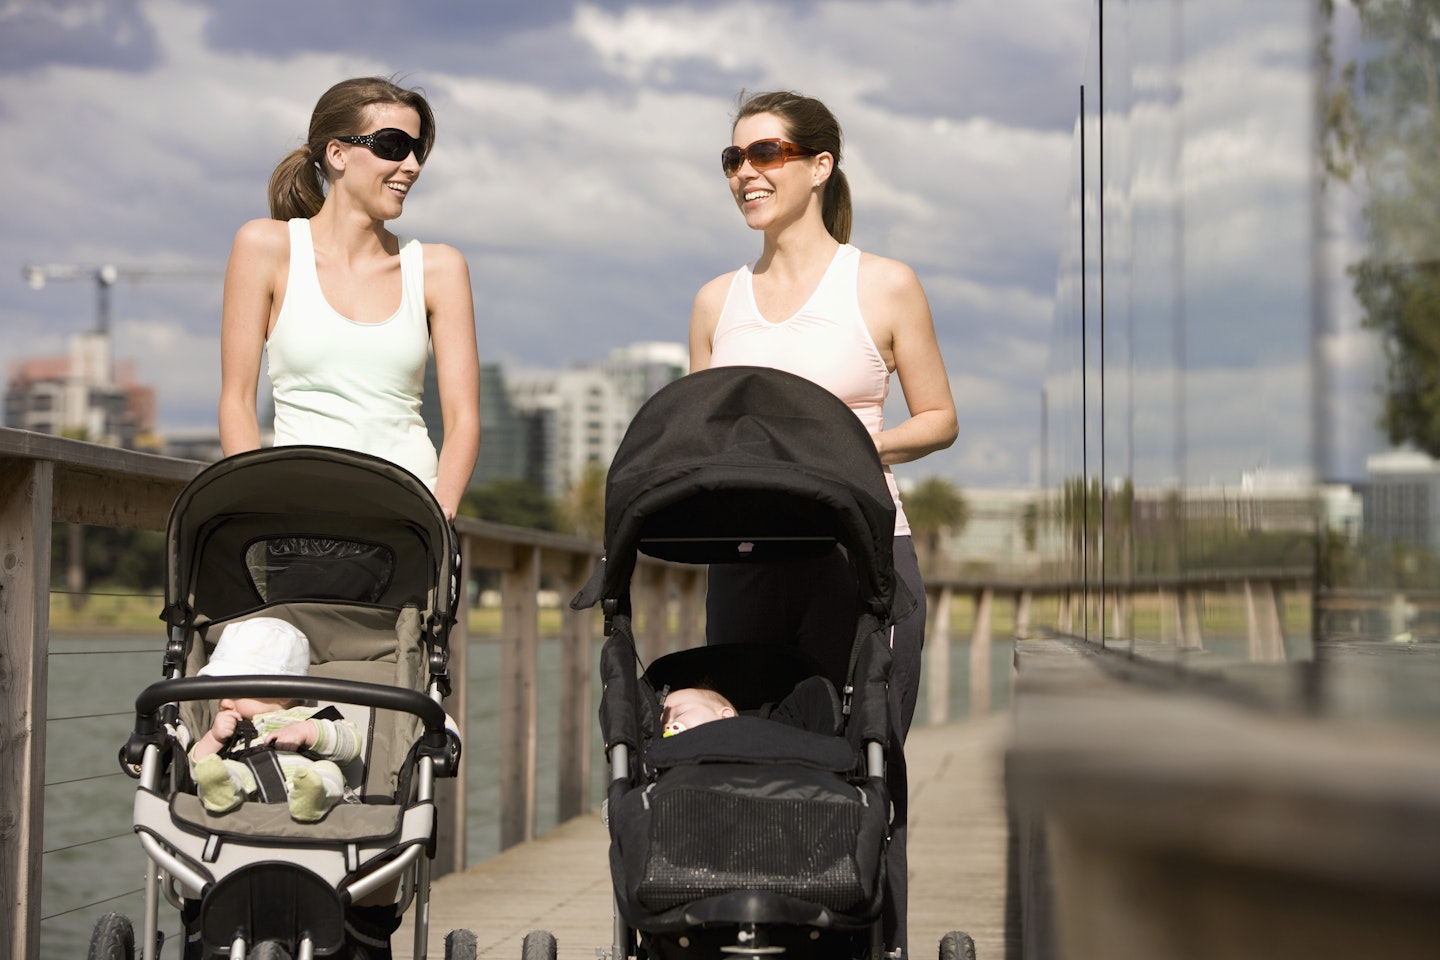 Do New Mums Really Use Their Baby As A Reason Not To Exercise?